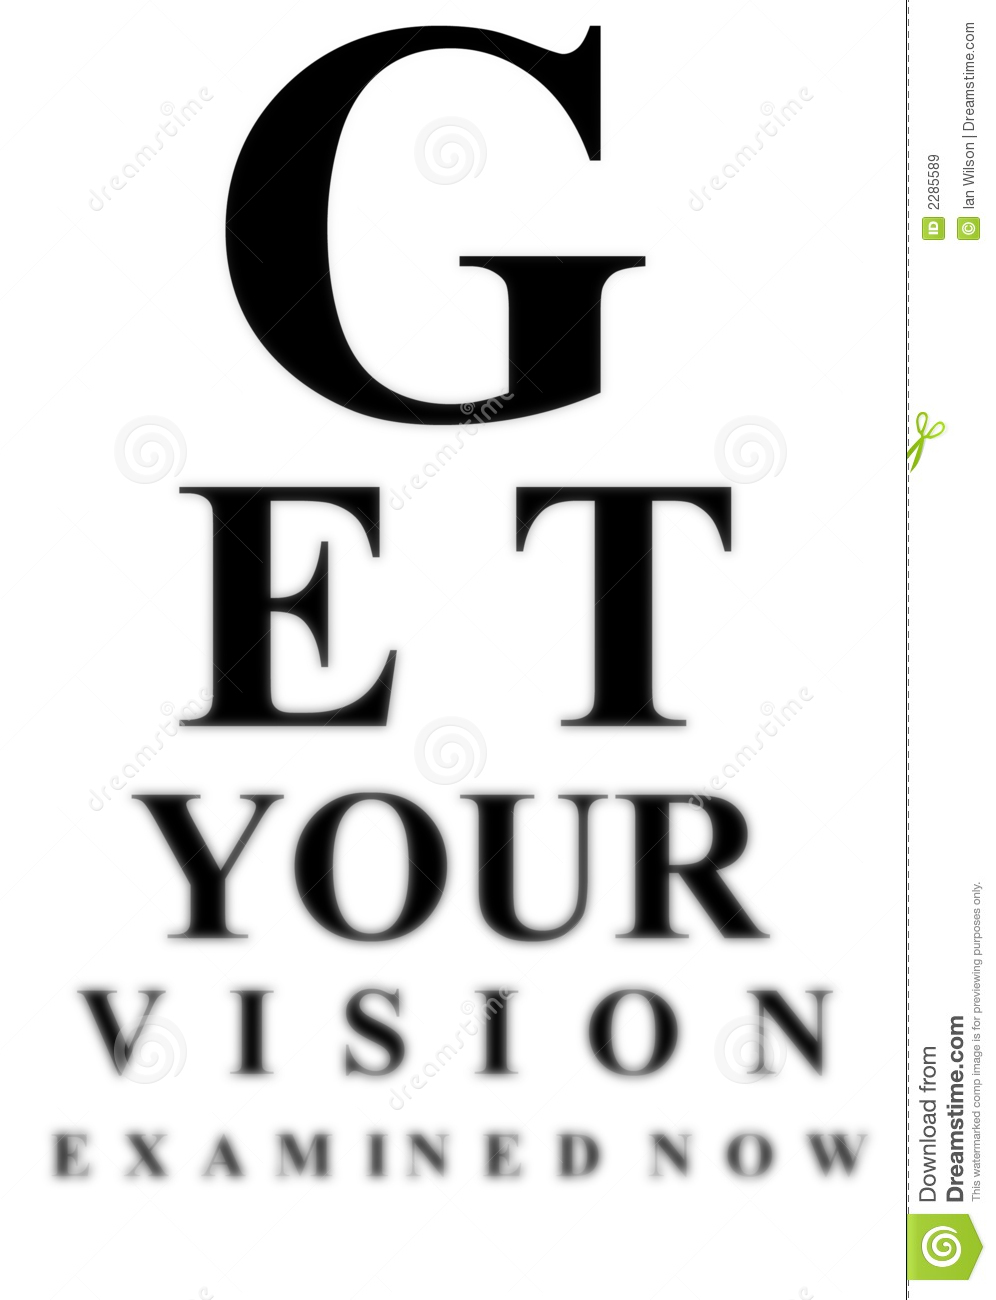 Get Your Vision Examined Now Blurring As The Letters Get Smaller